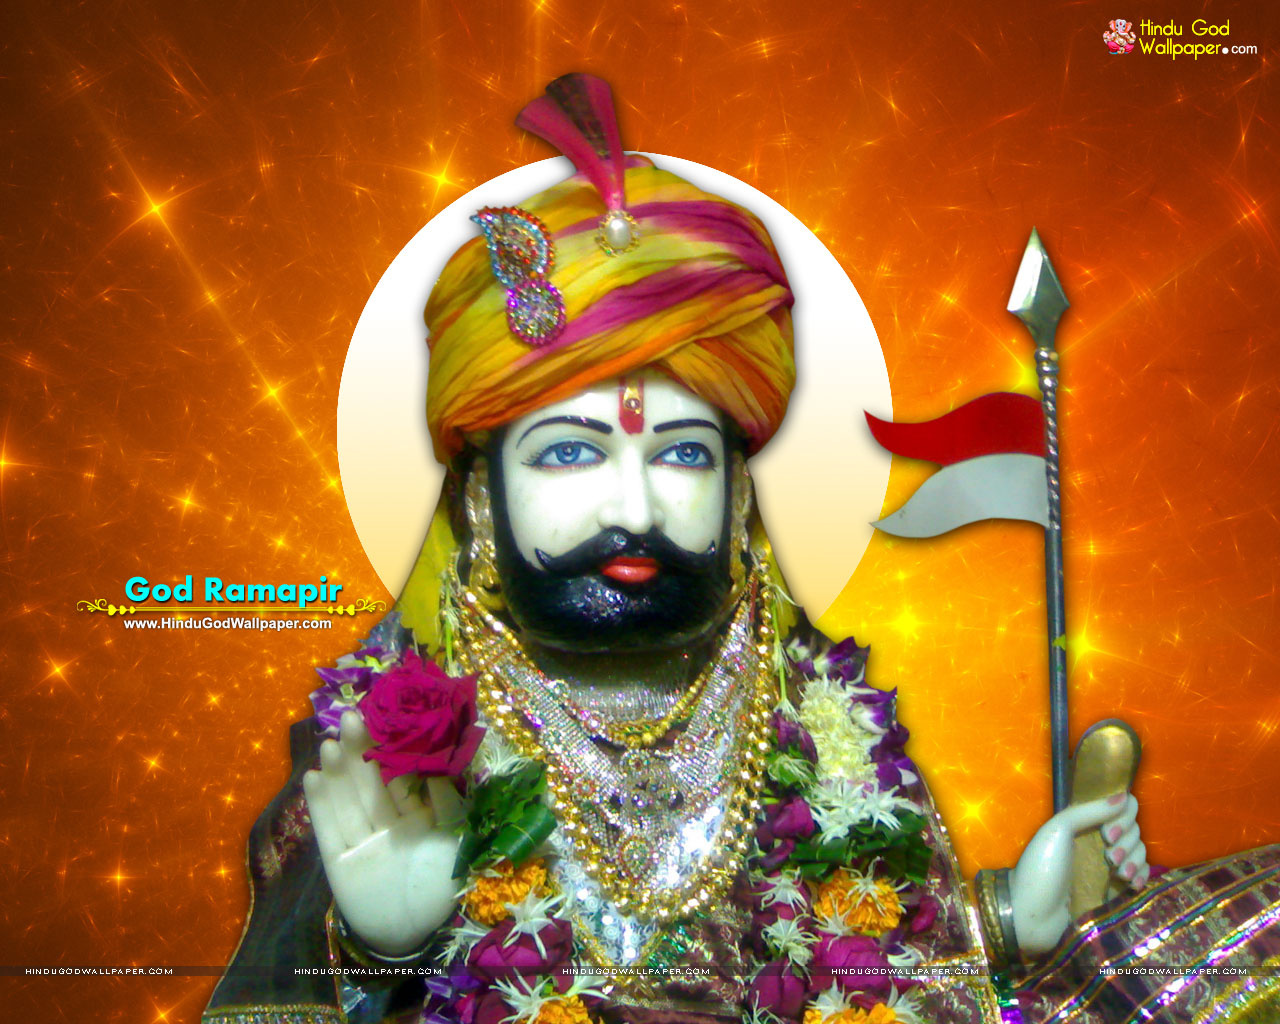 God Ramapir Wallpapers, Pictures & Images Free Download